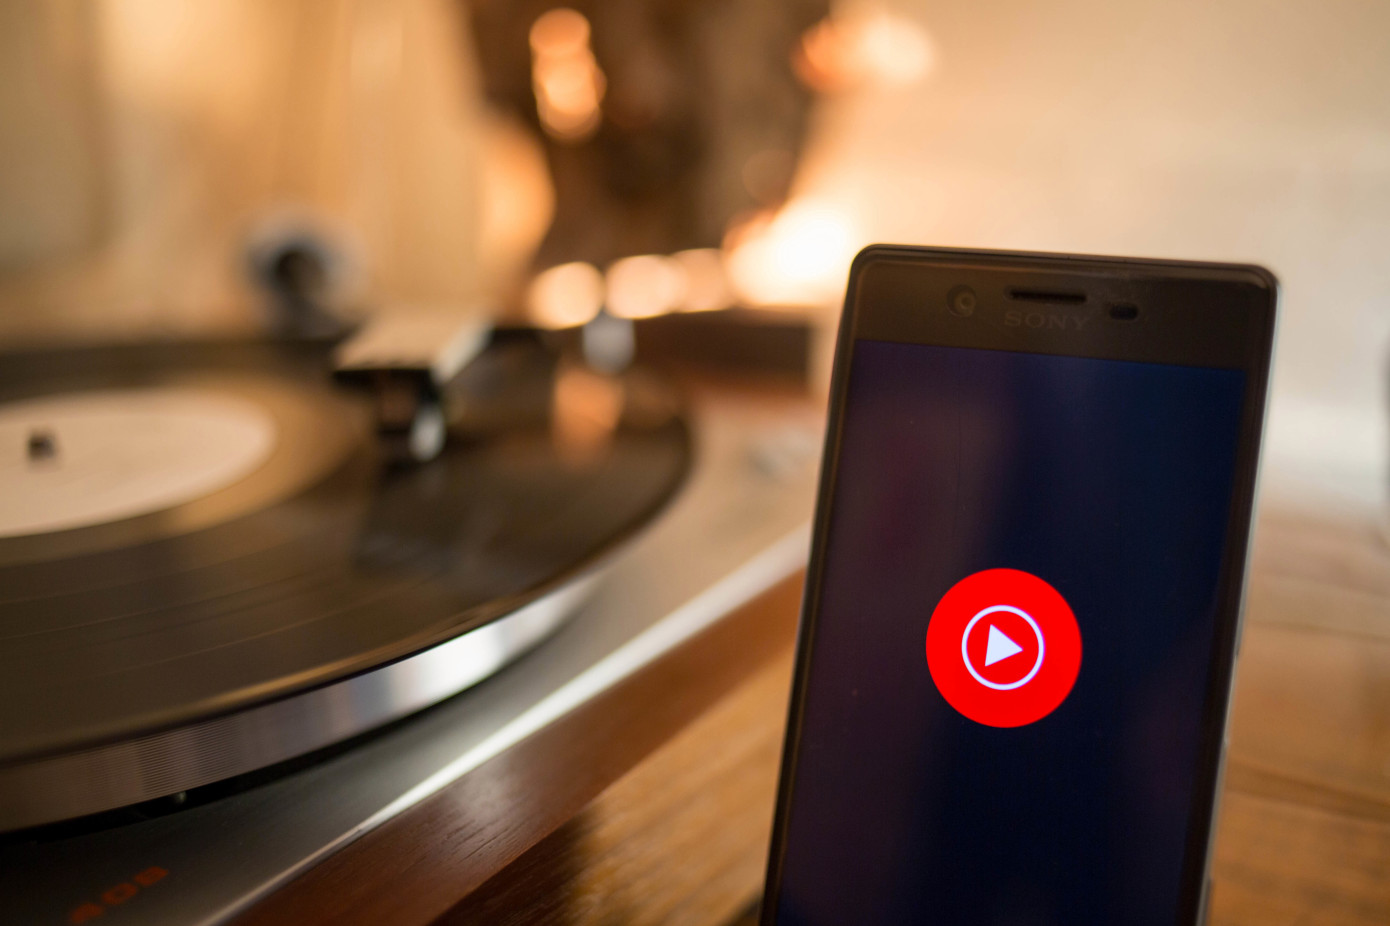 YouTube Music’s latest feature lets users create custom radio stations